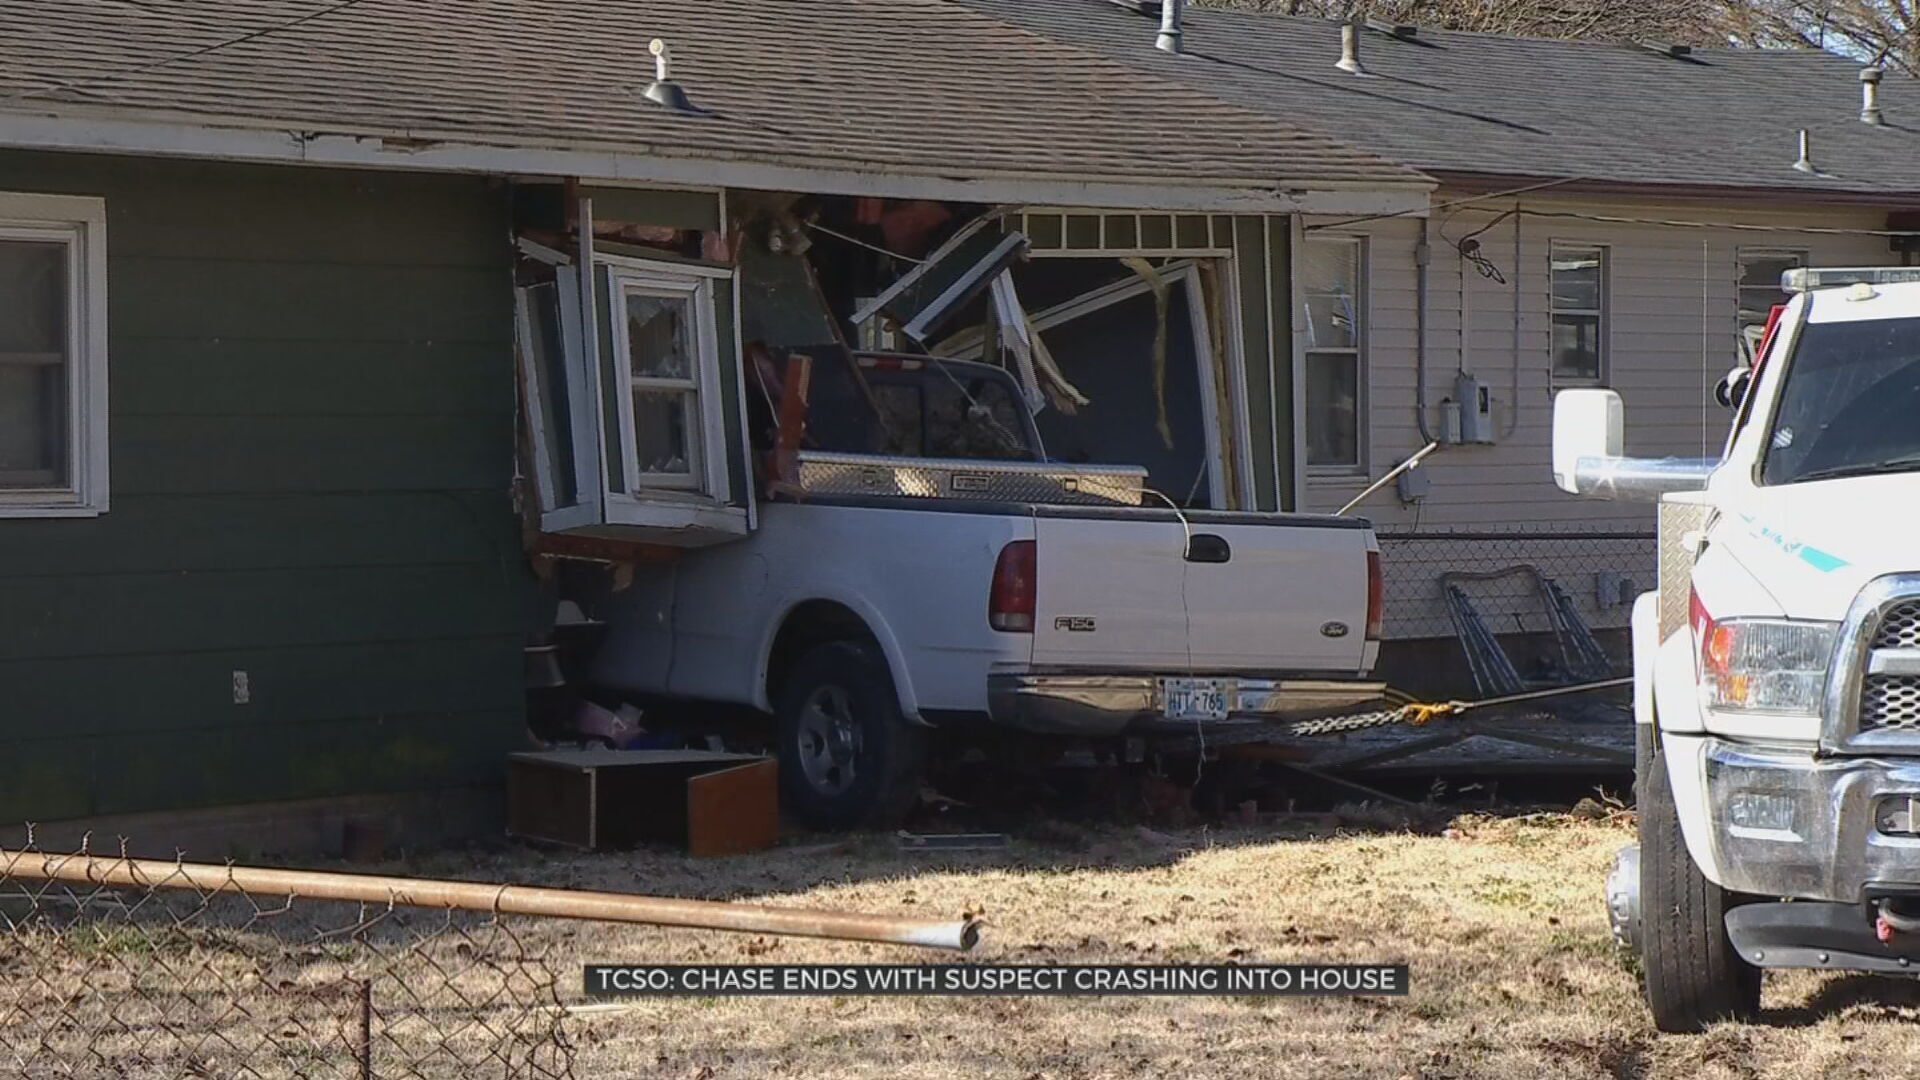 Tulsa Homeowner 'Fortunate' After Chase Suspect Crashes Truck Into House